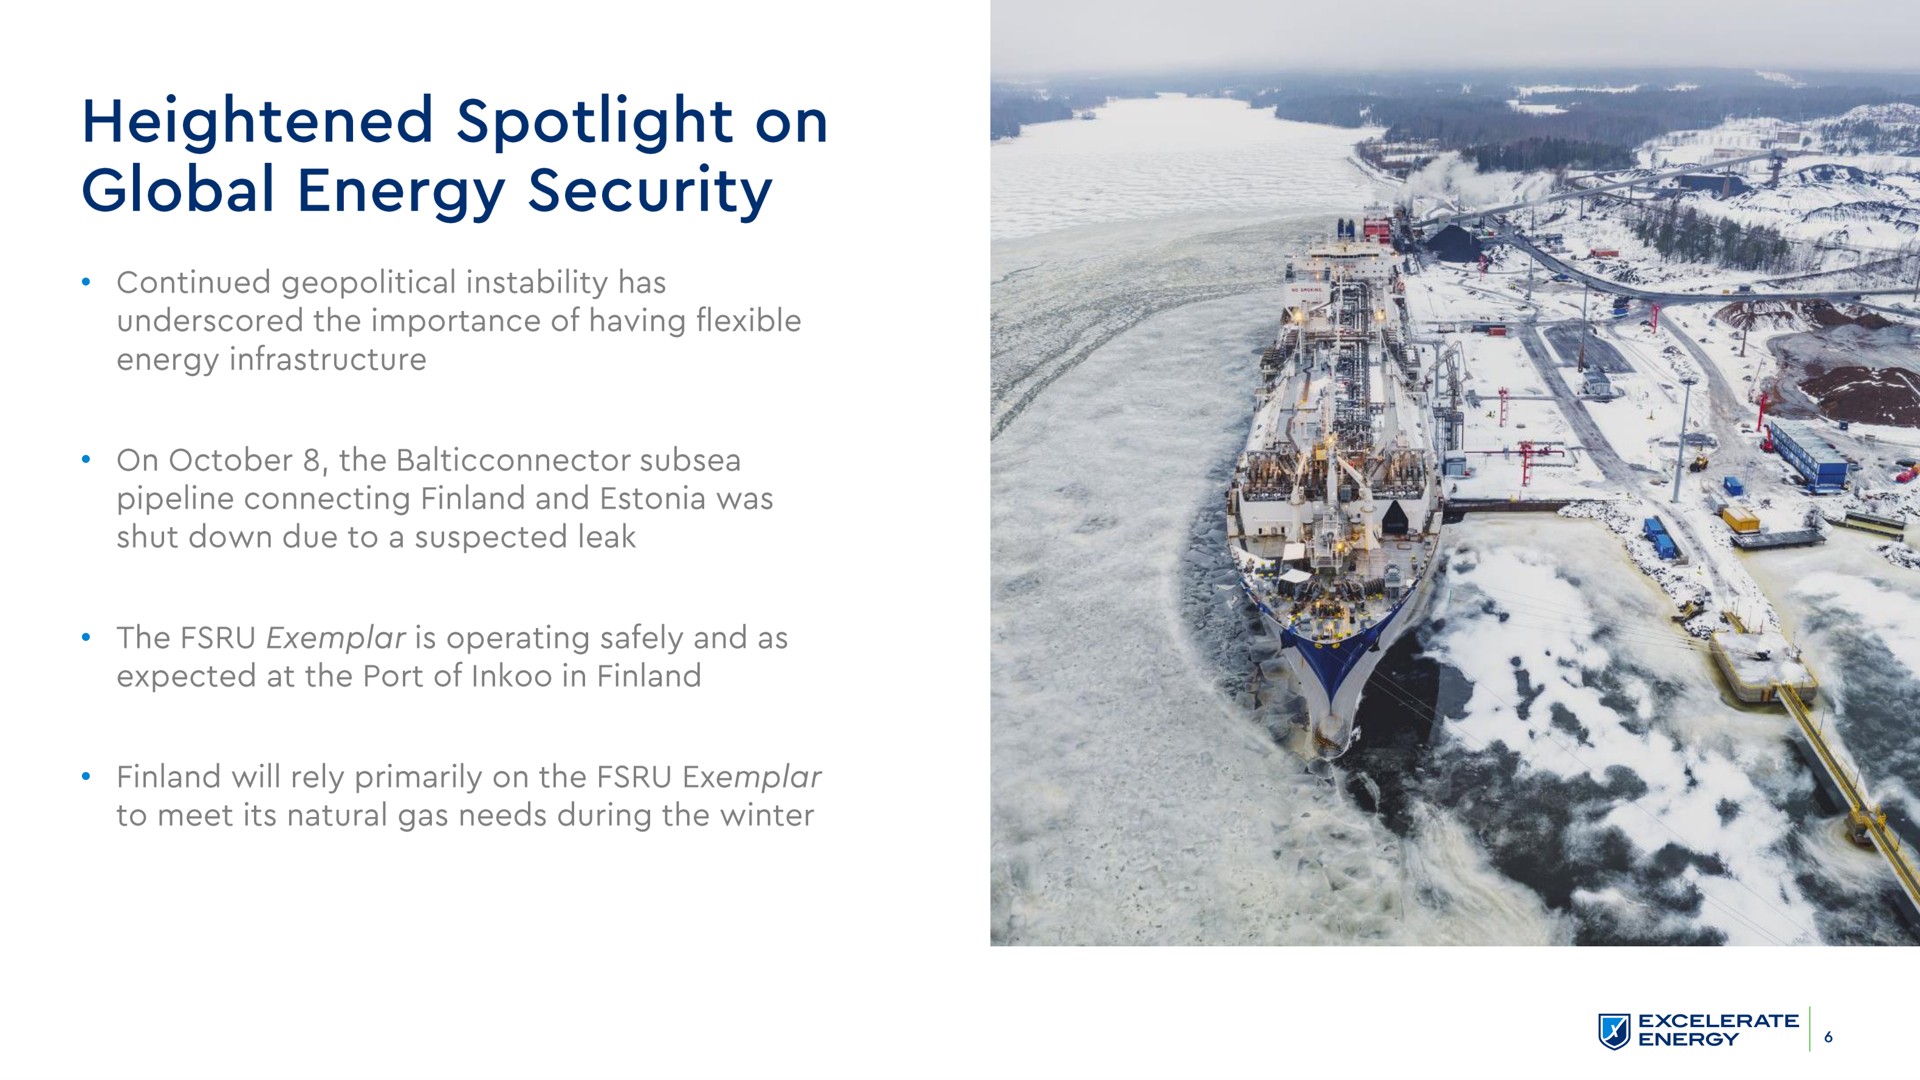 heightened spotlight on global energy security | Excelerate Energy